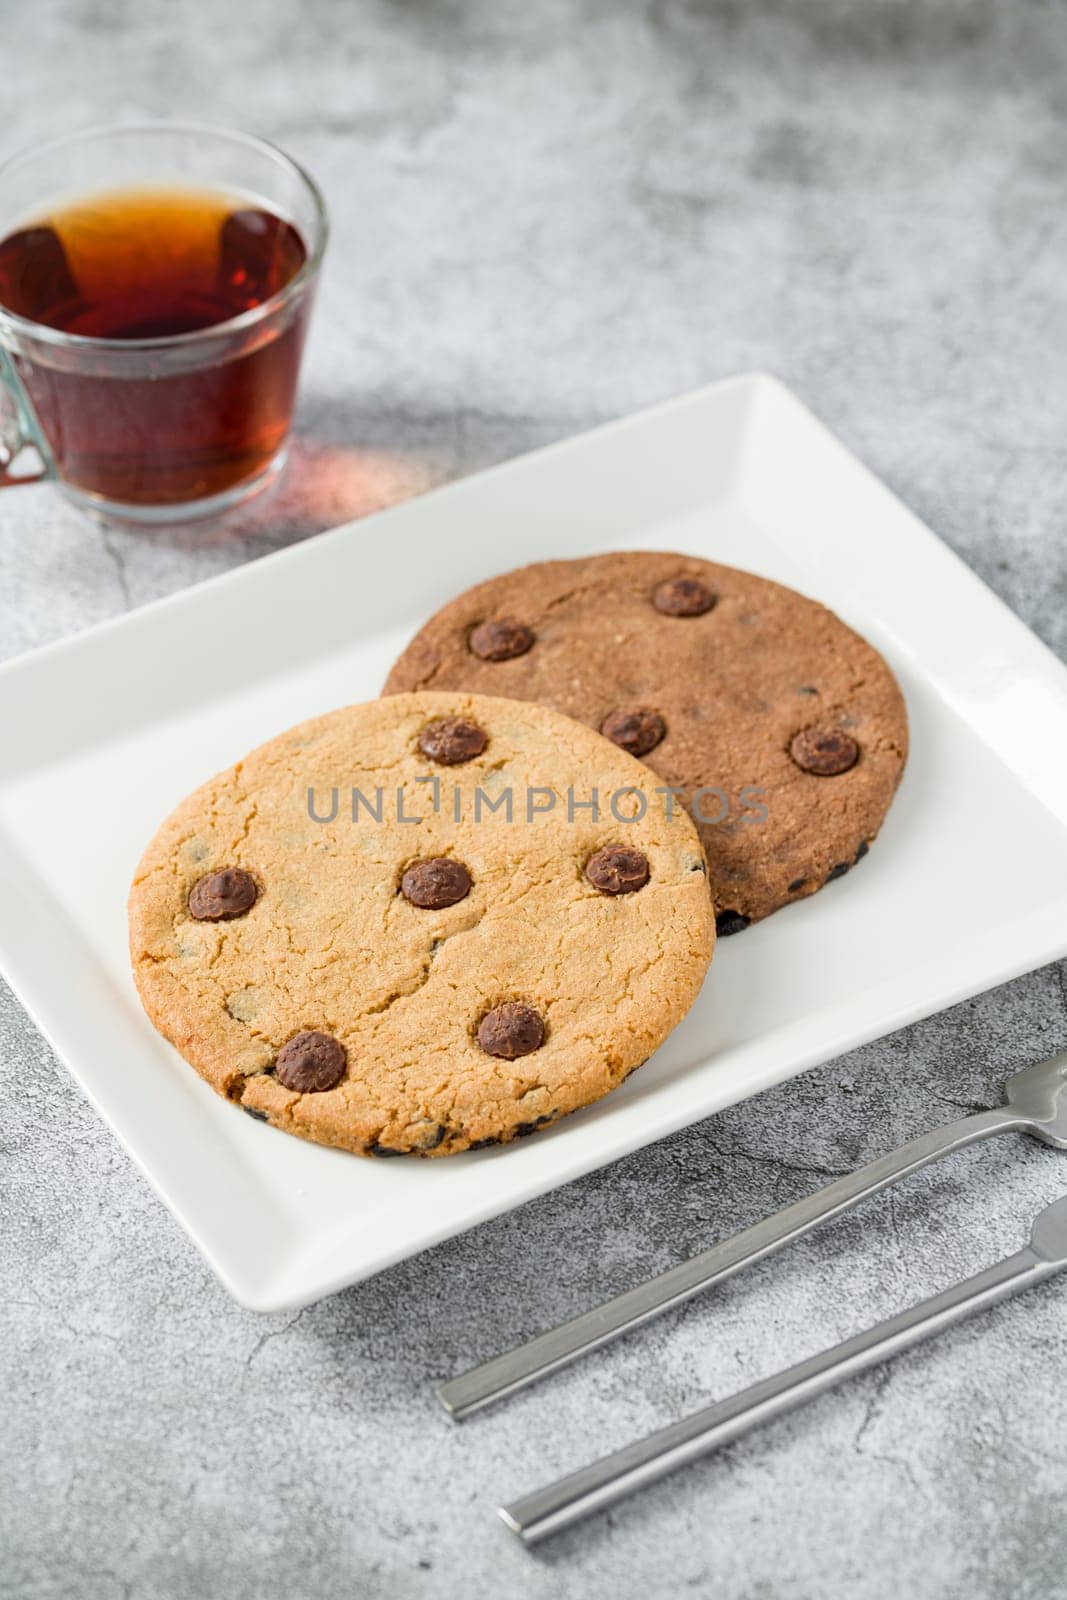 Chocolate chip cookies with tea on the stone table